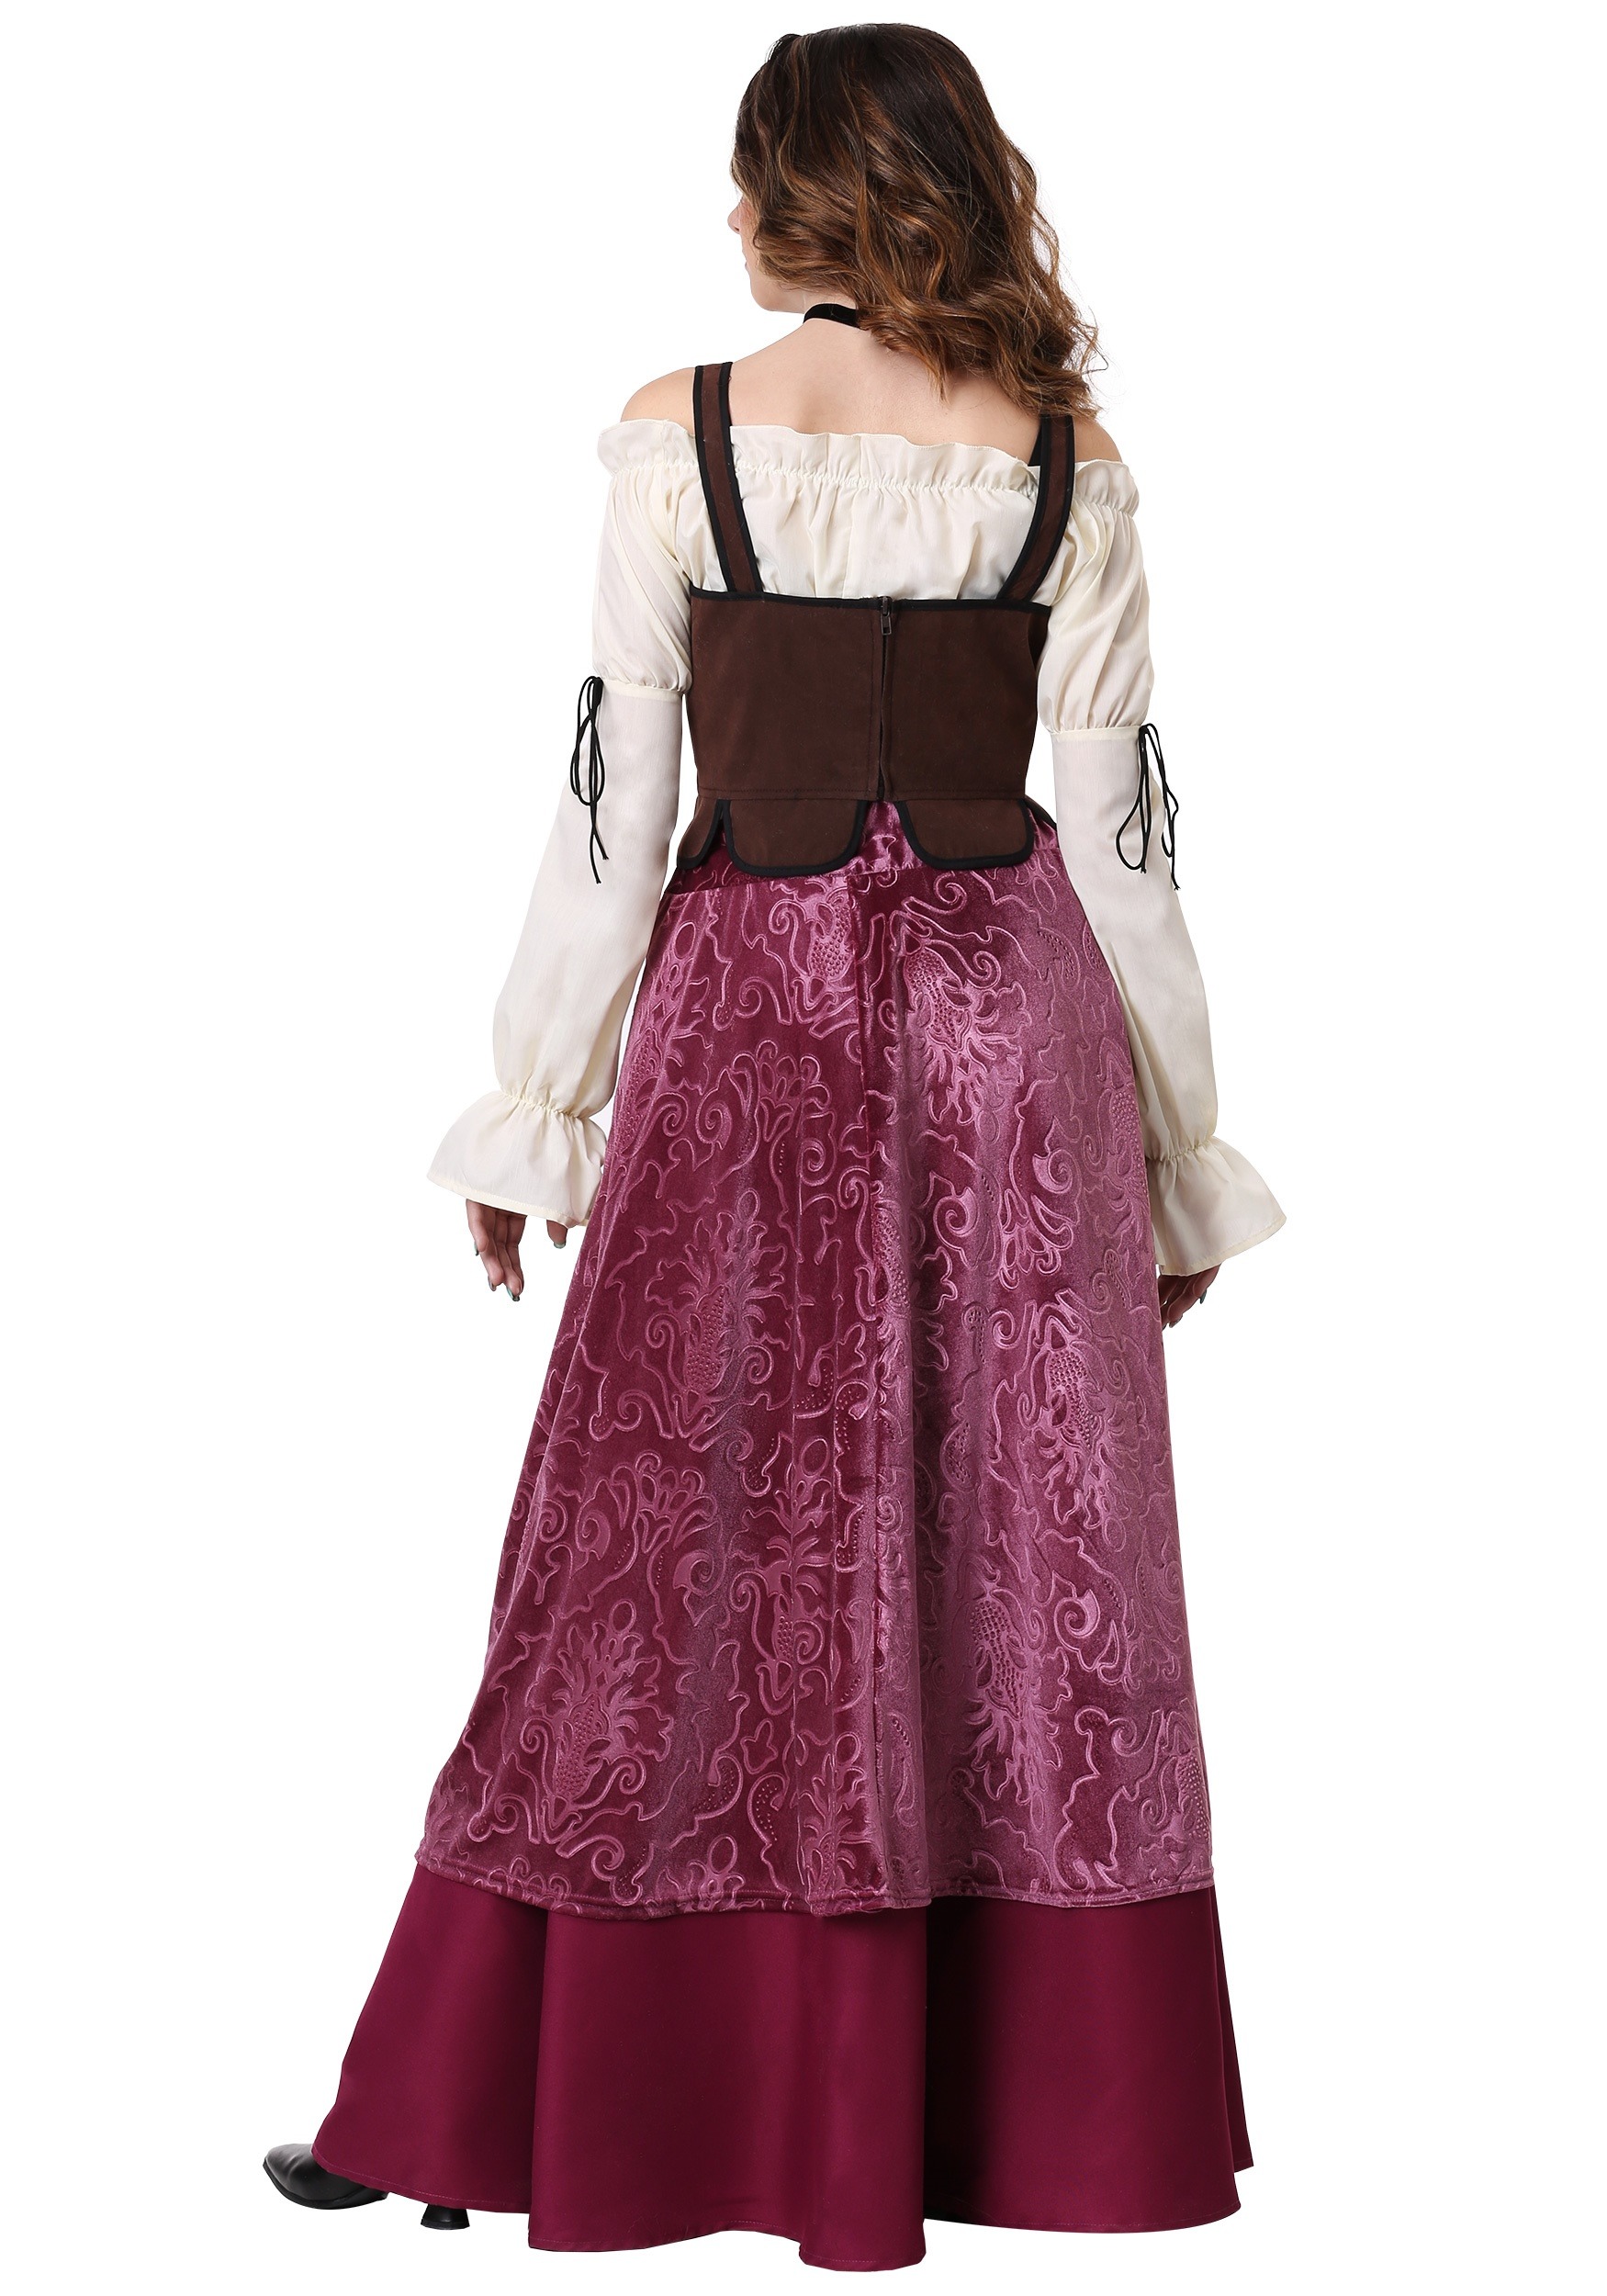 Tavern Wench Costume For Women